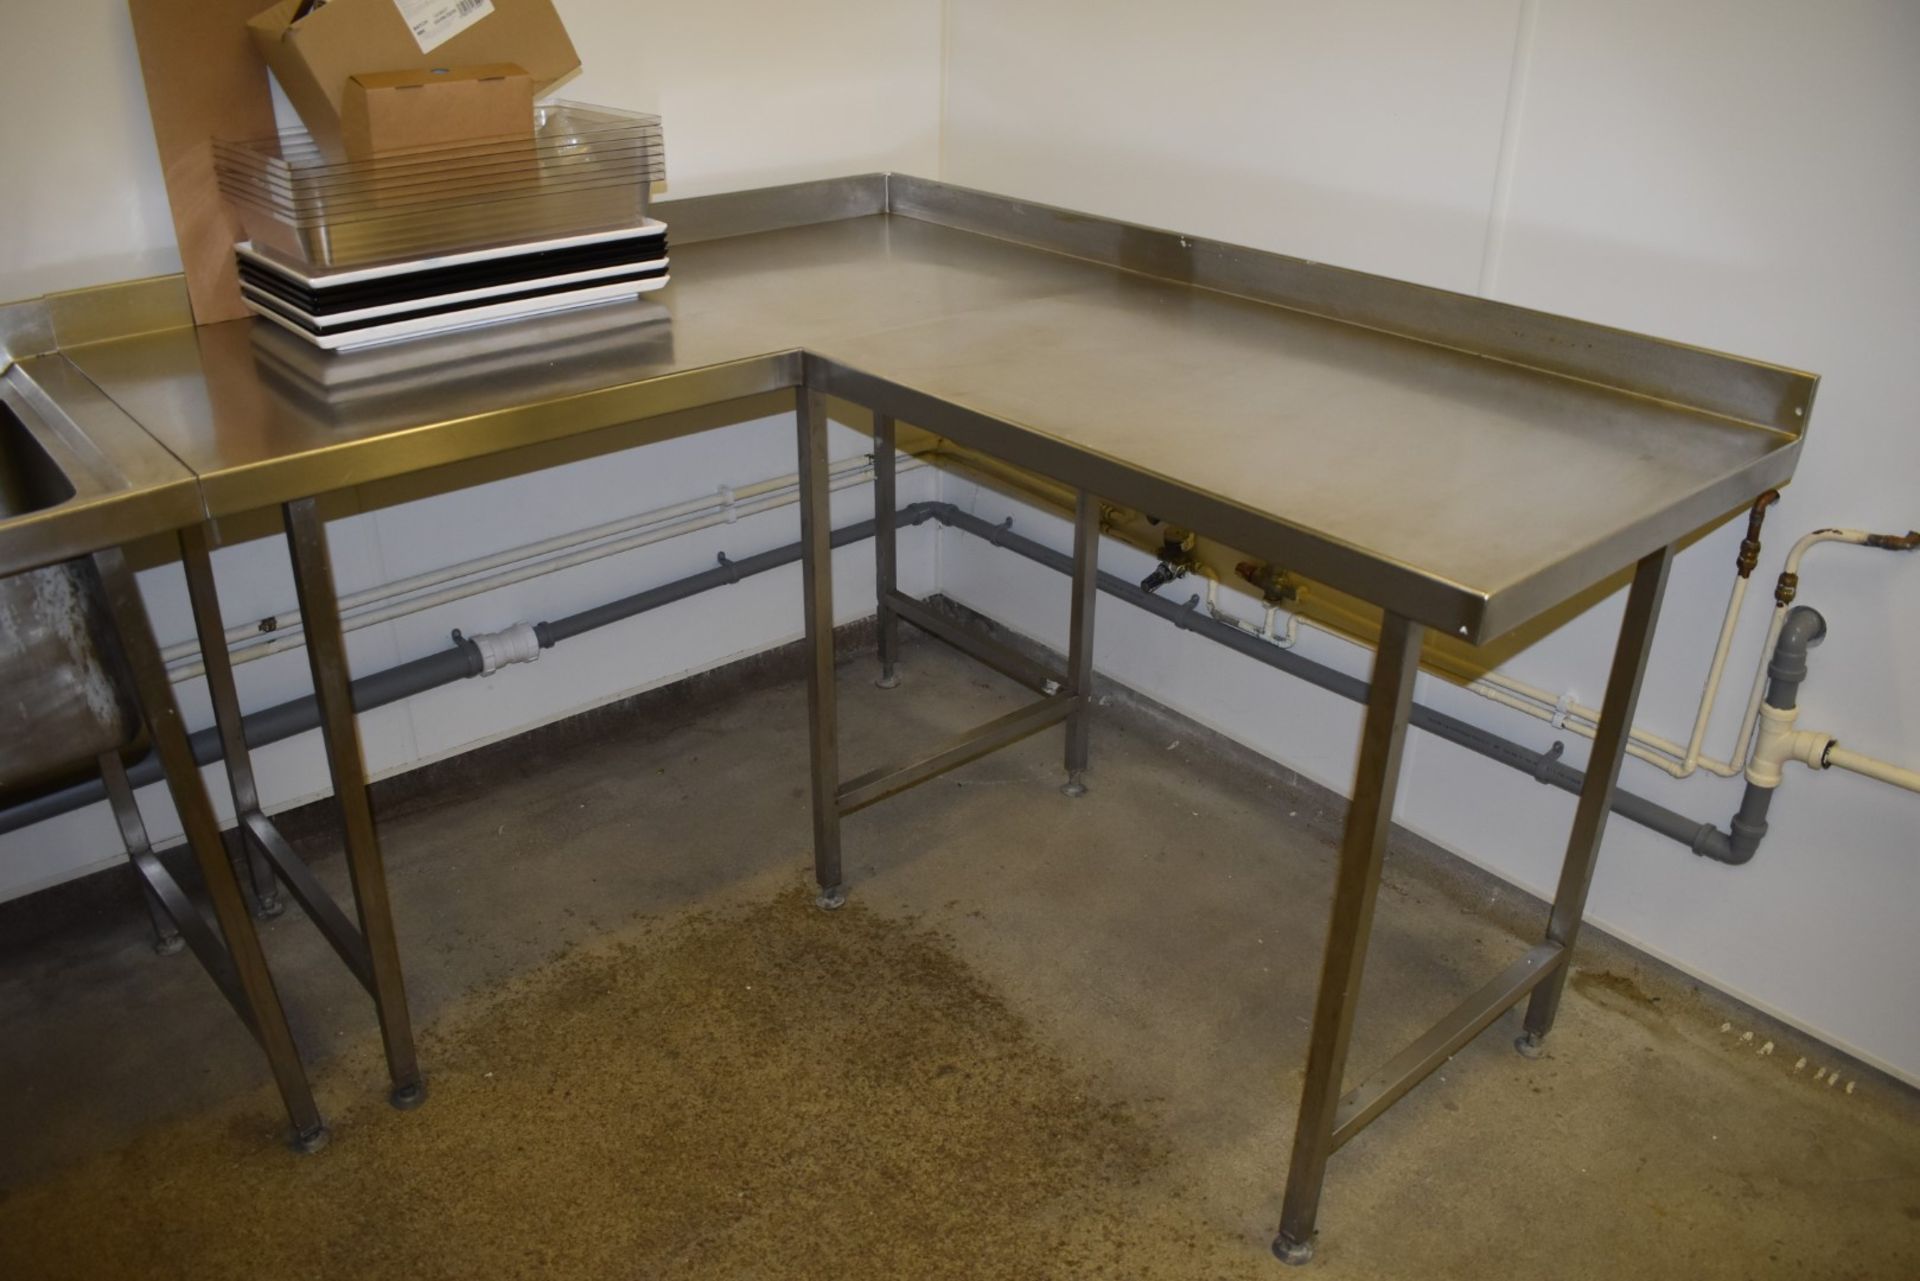 1 x Stainless Steel Wash Station With Two Wash Basins and One EWB Boiling Water Basin - Approx 18 - Image 15 of 15